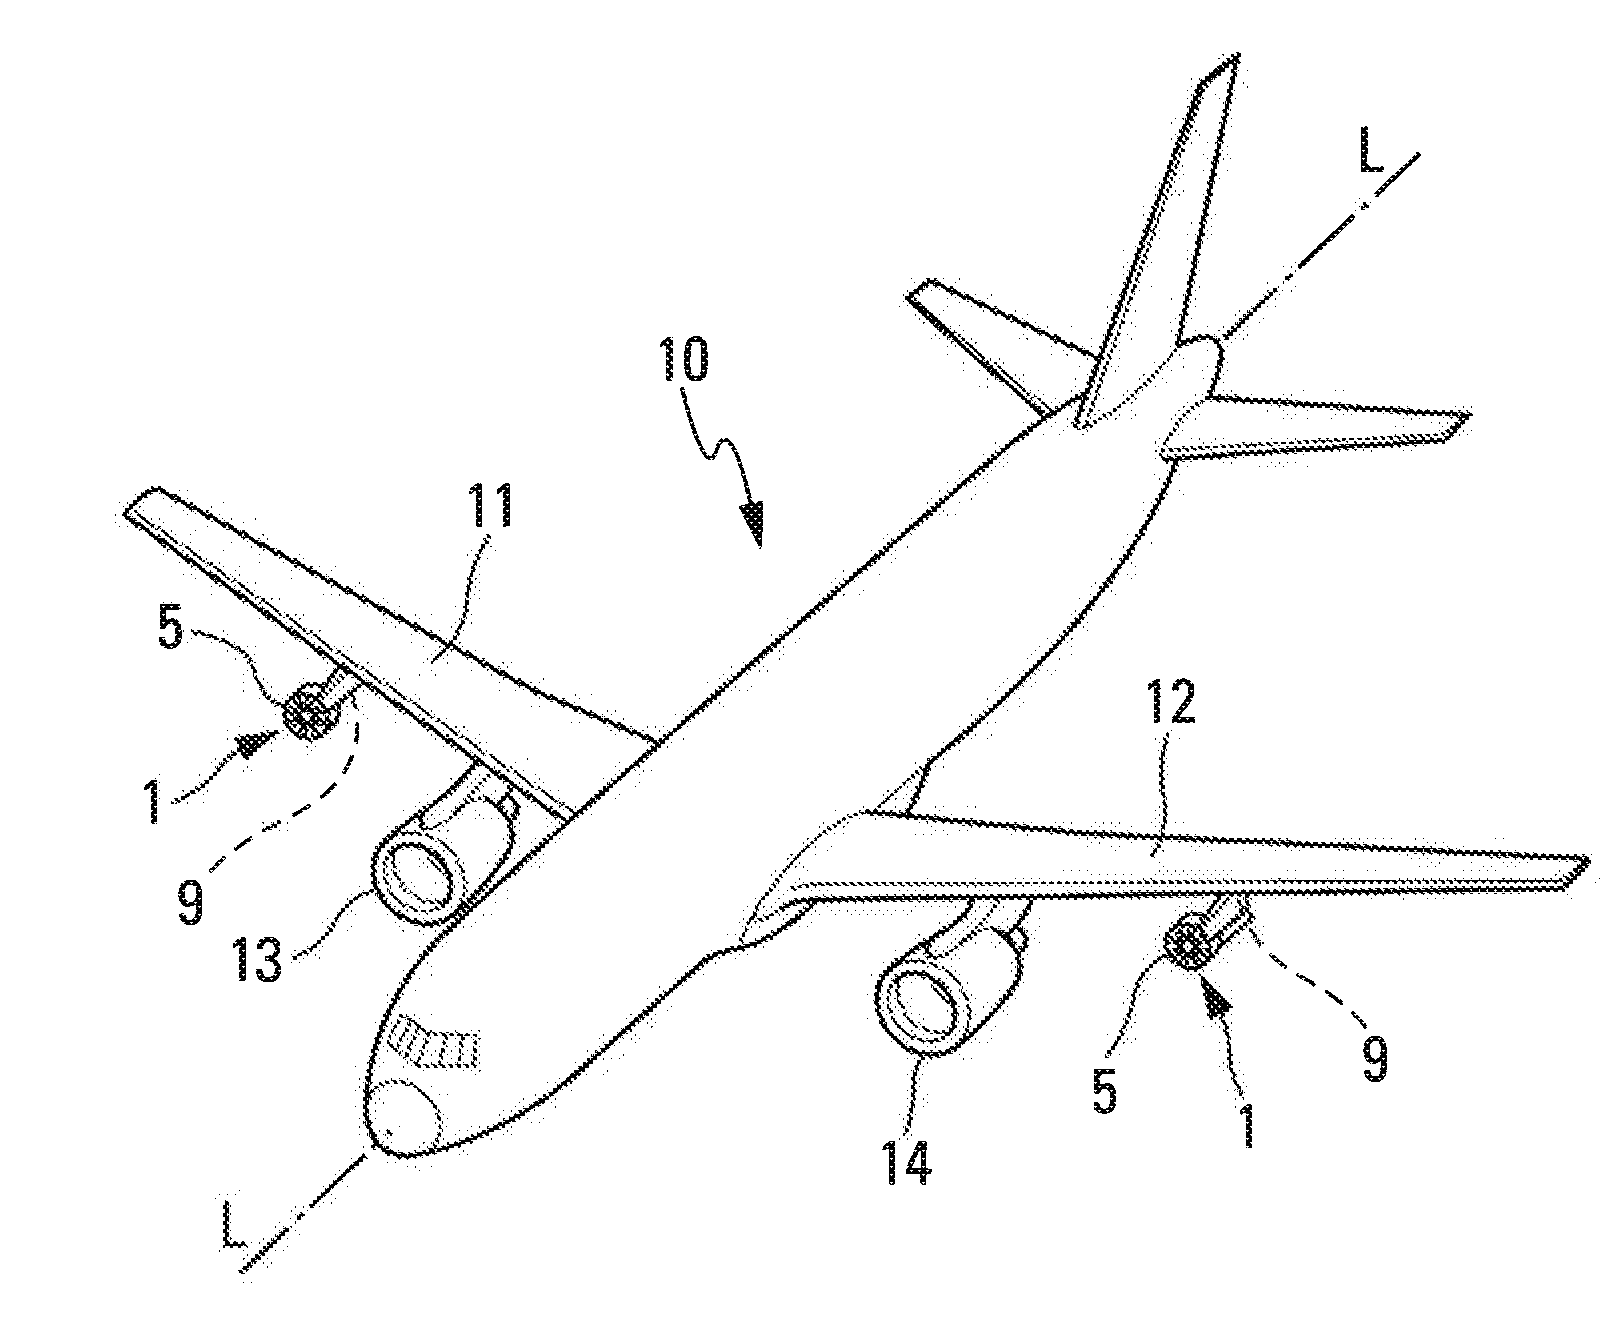 Removable auxiliary power device for aircraft and aircraft adapted to use at least one such device